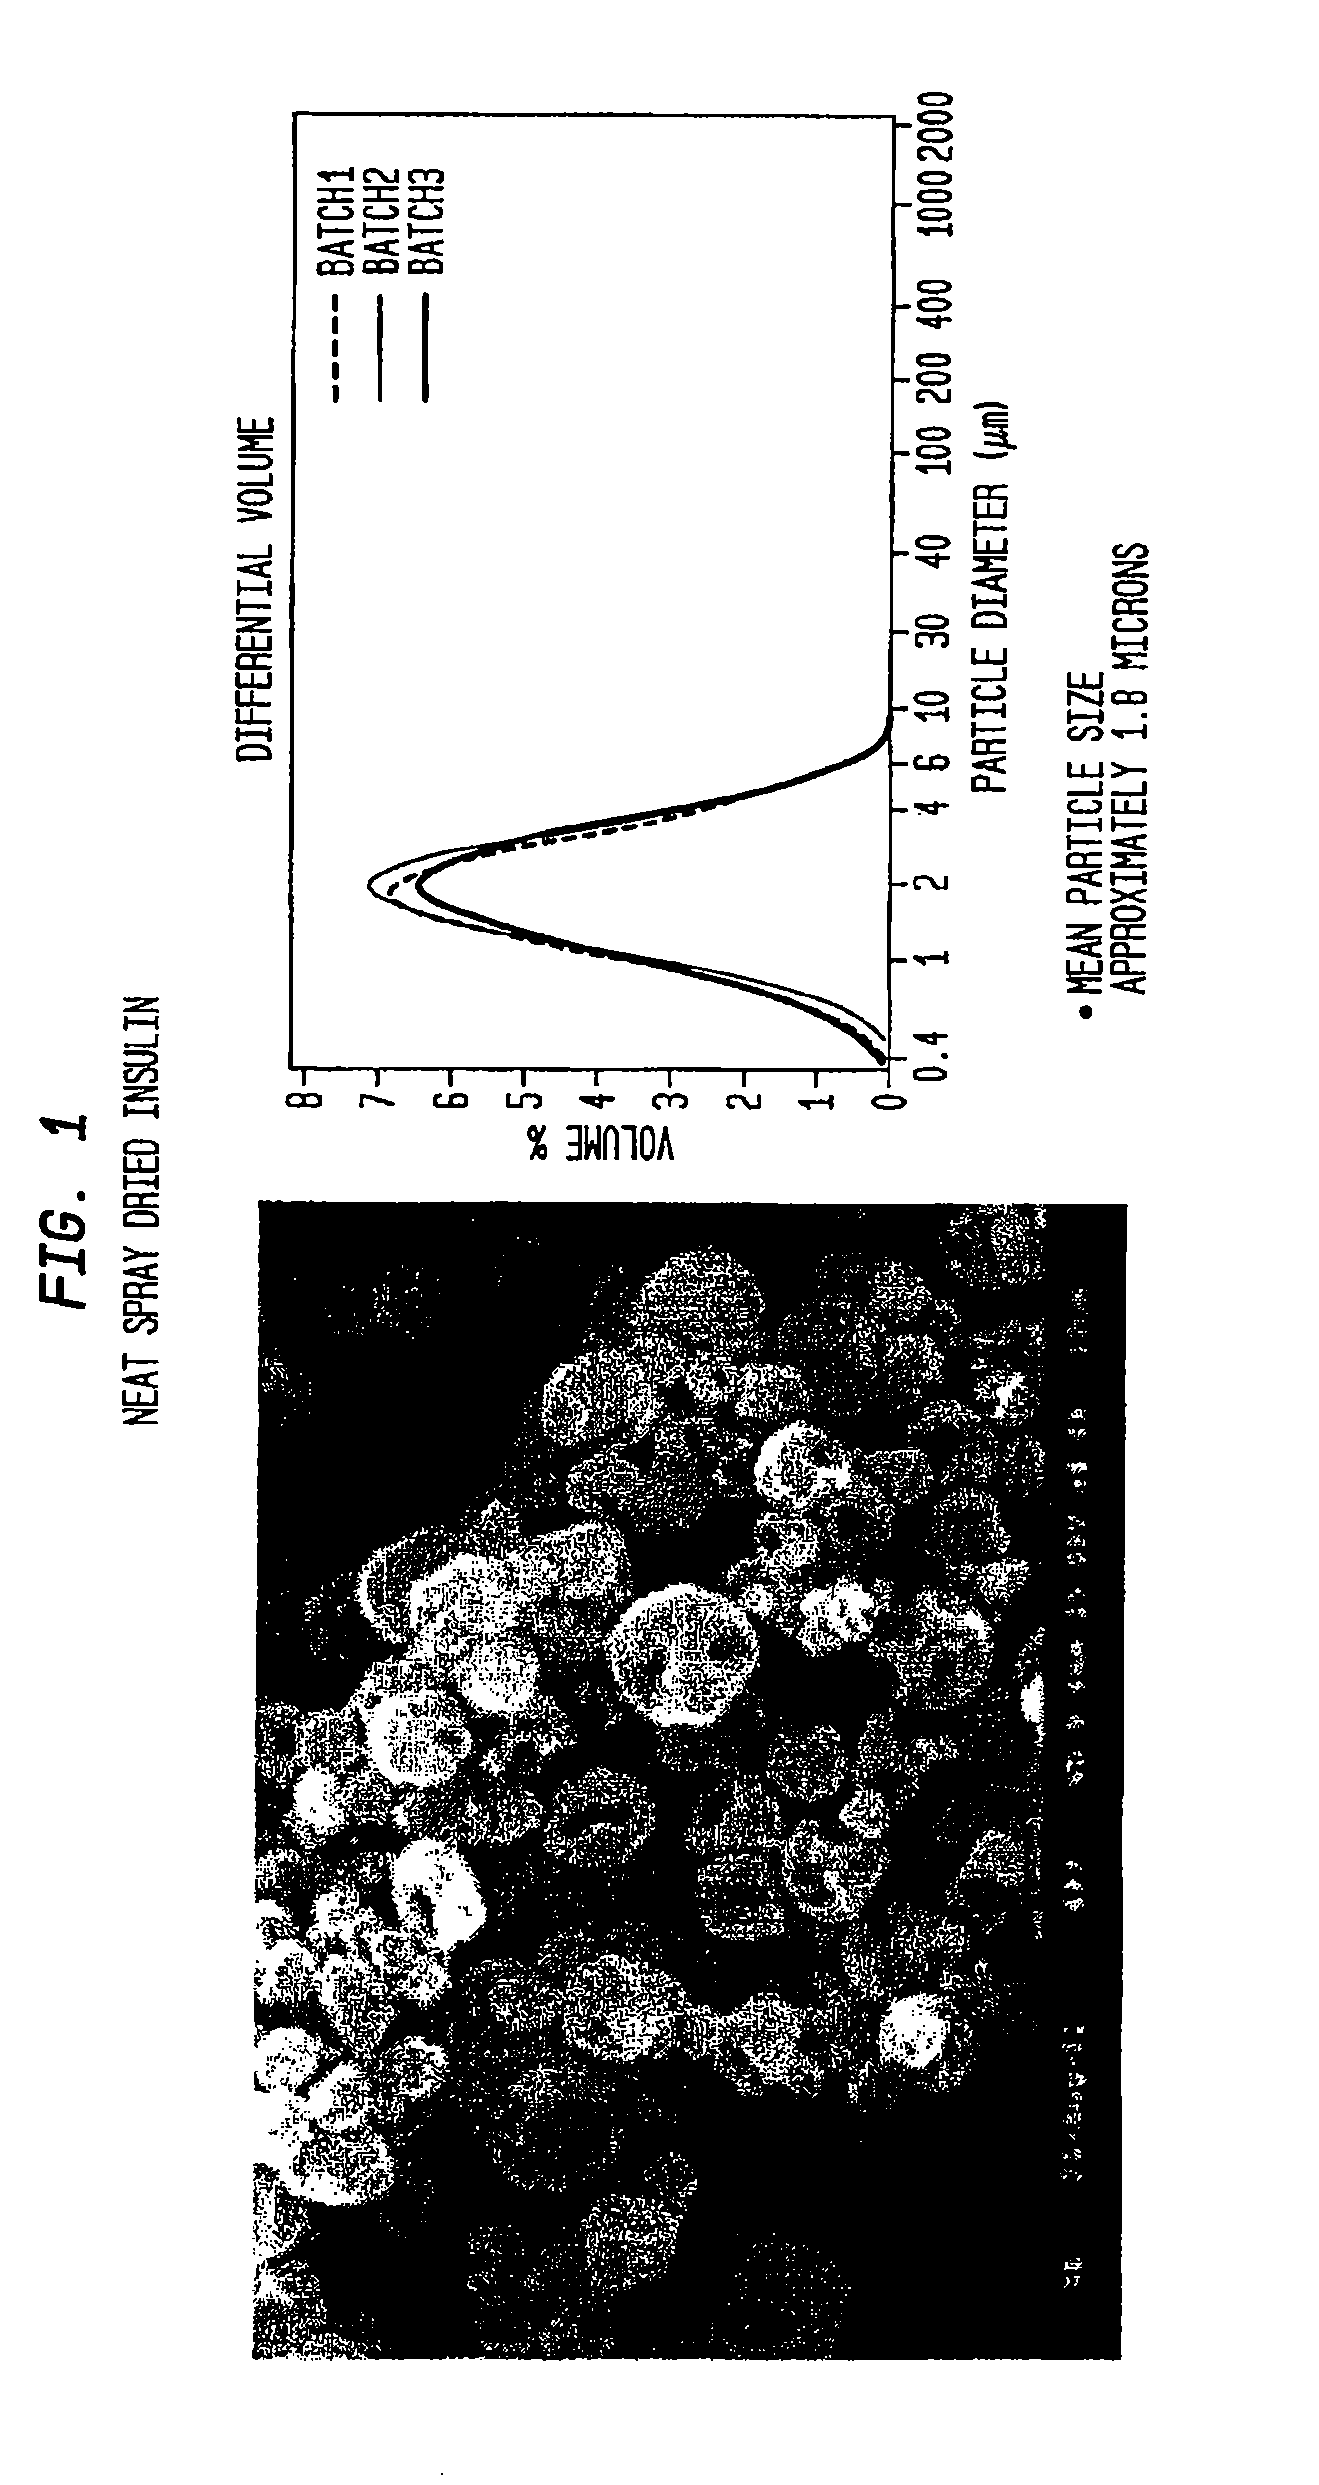 Use of mks inhibitor peptide-containing compositions for treating non-small cell lung cancer with same